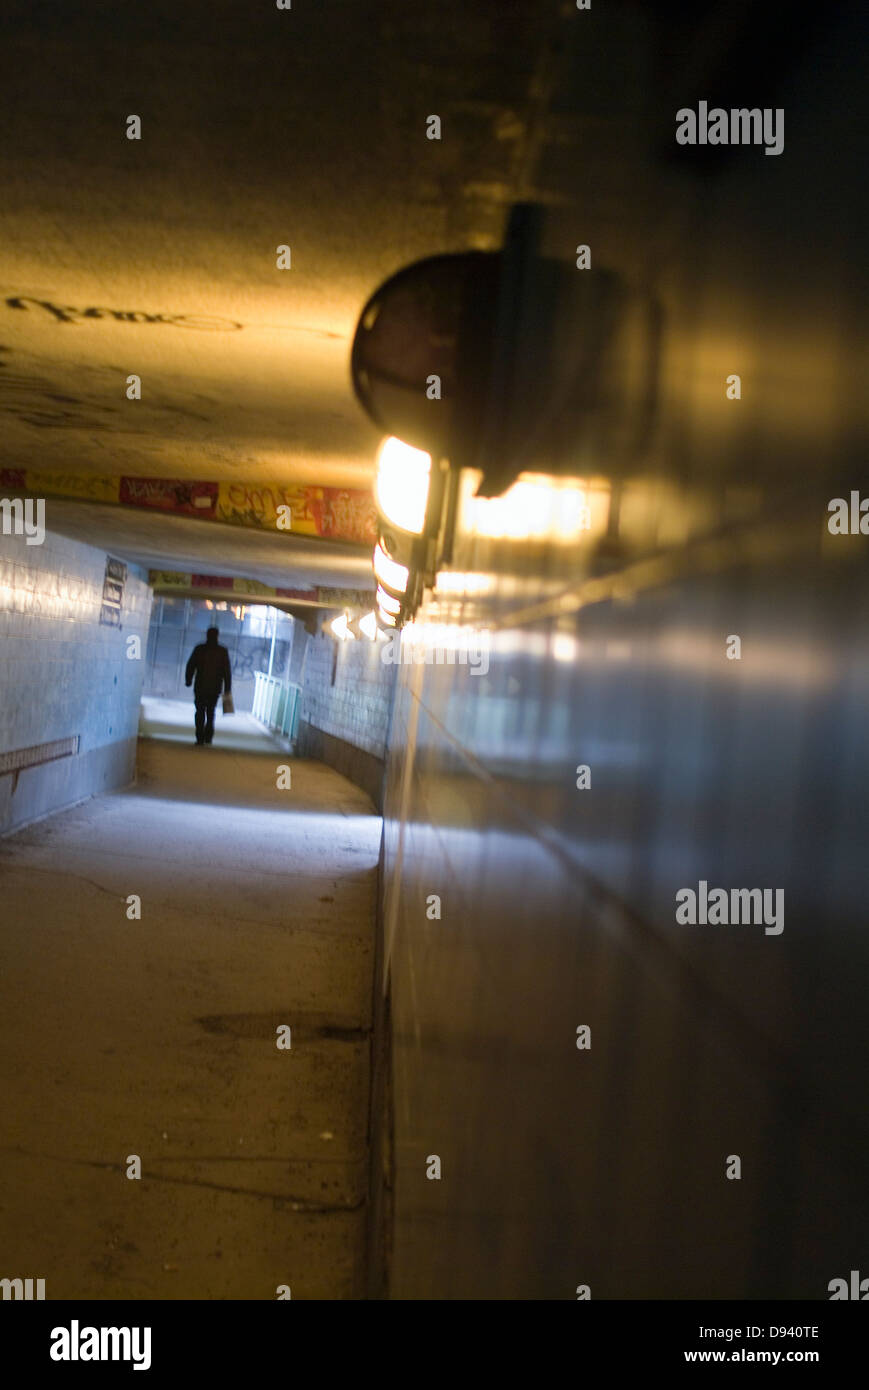 A tunnel in the subway, Stockholm, Sweden. Stock Photo